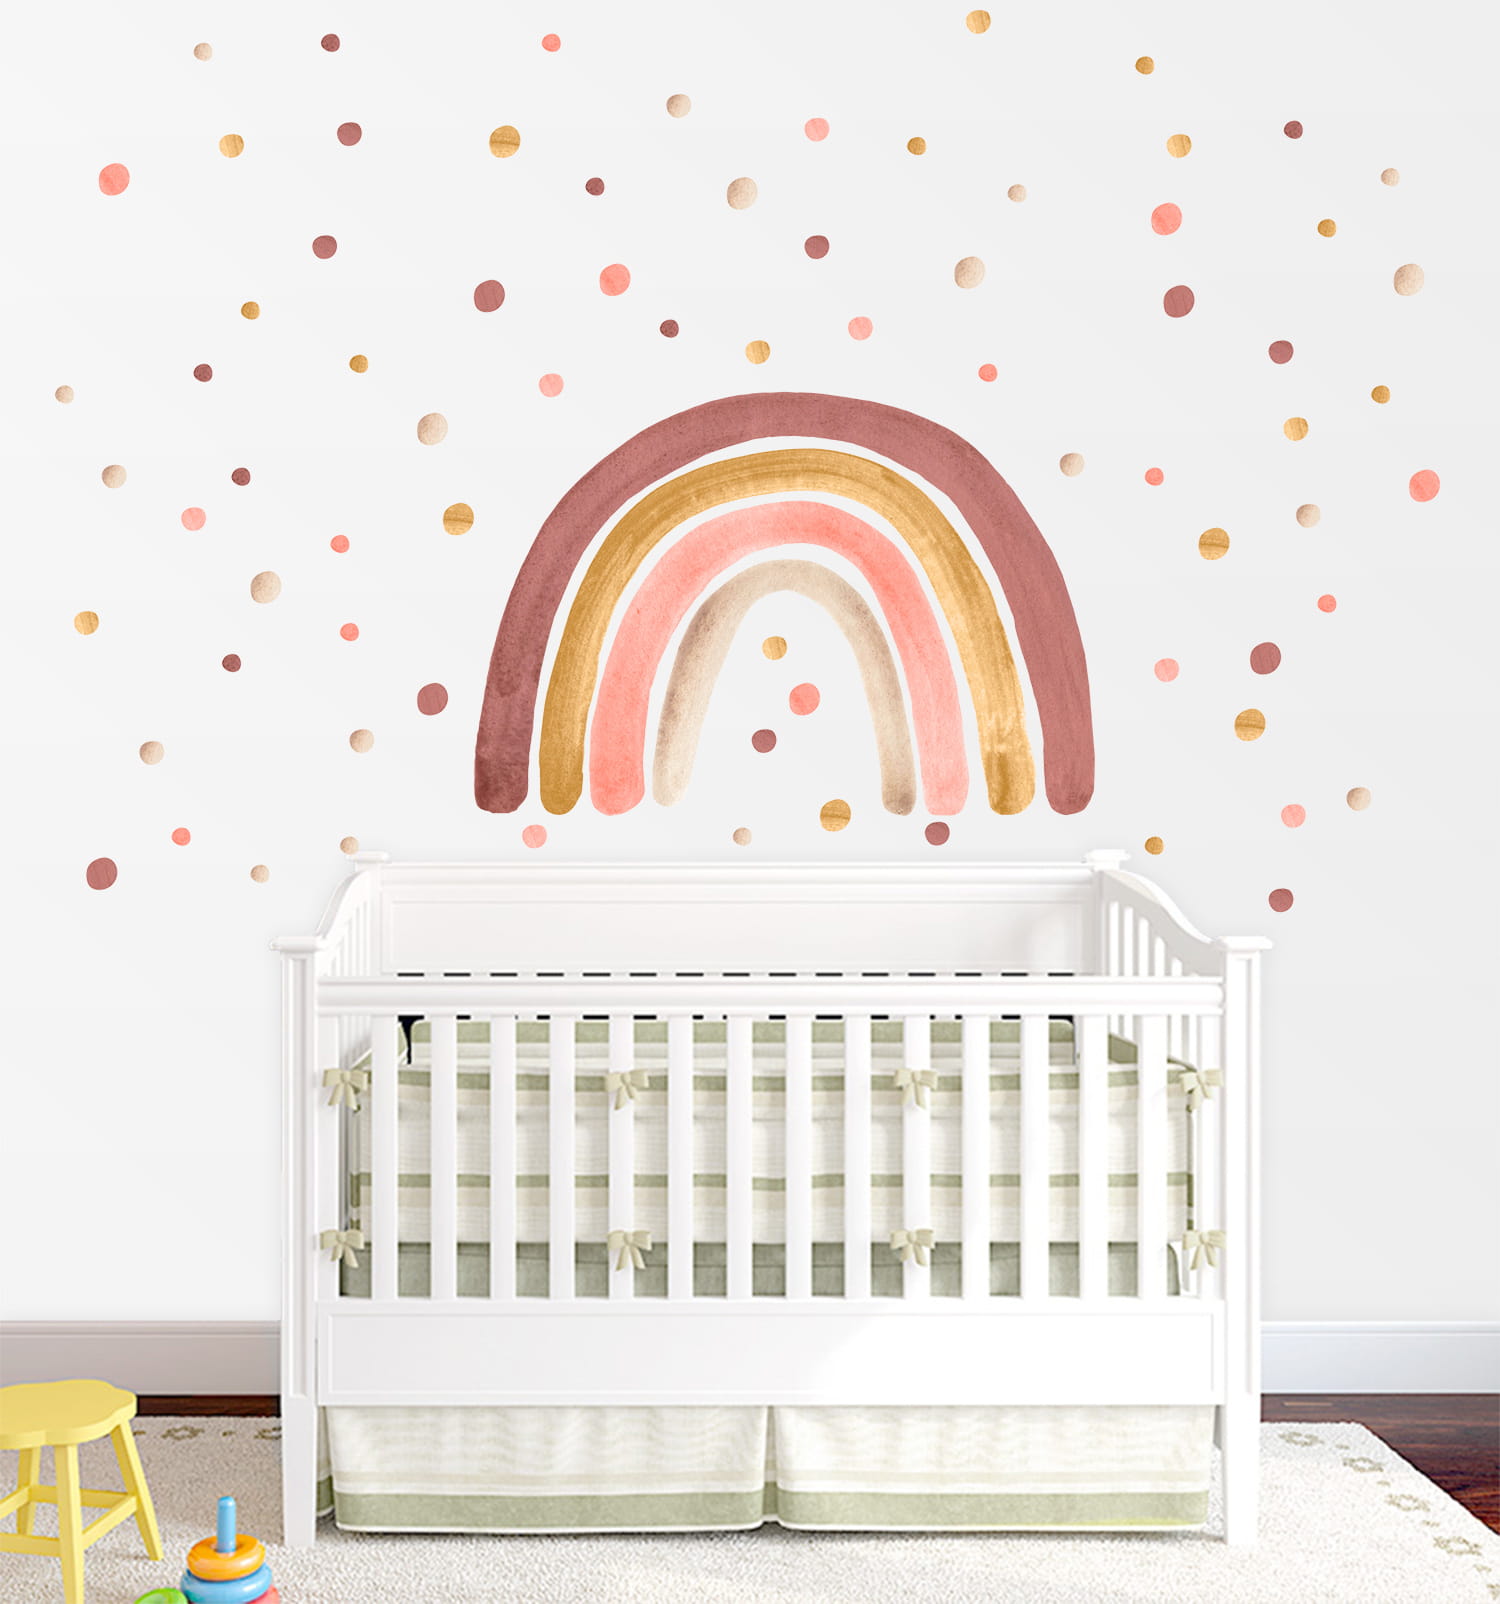 Babylove, wall sticker rainbow with dots, dusty pink Babylove, wall sticker rainbow with dots, dusty pink